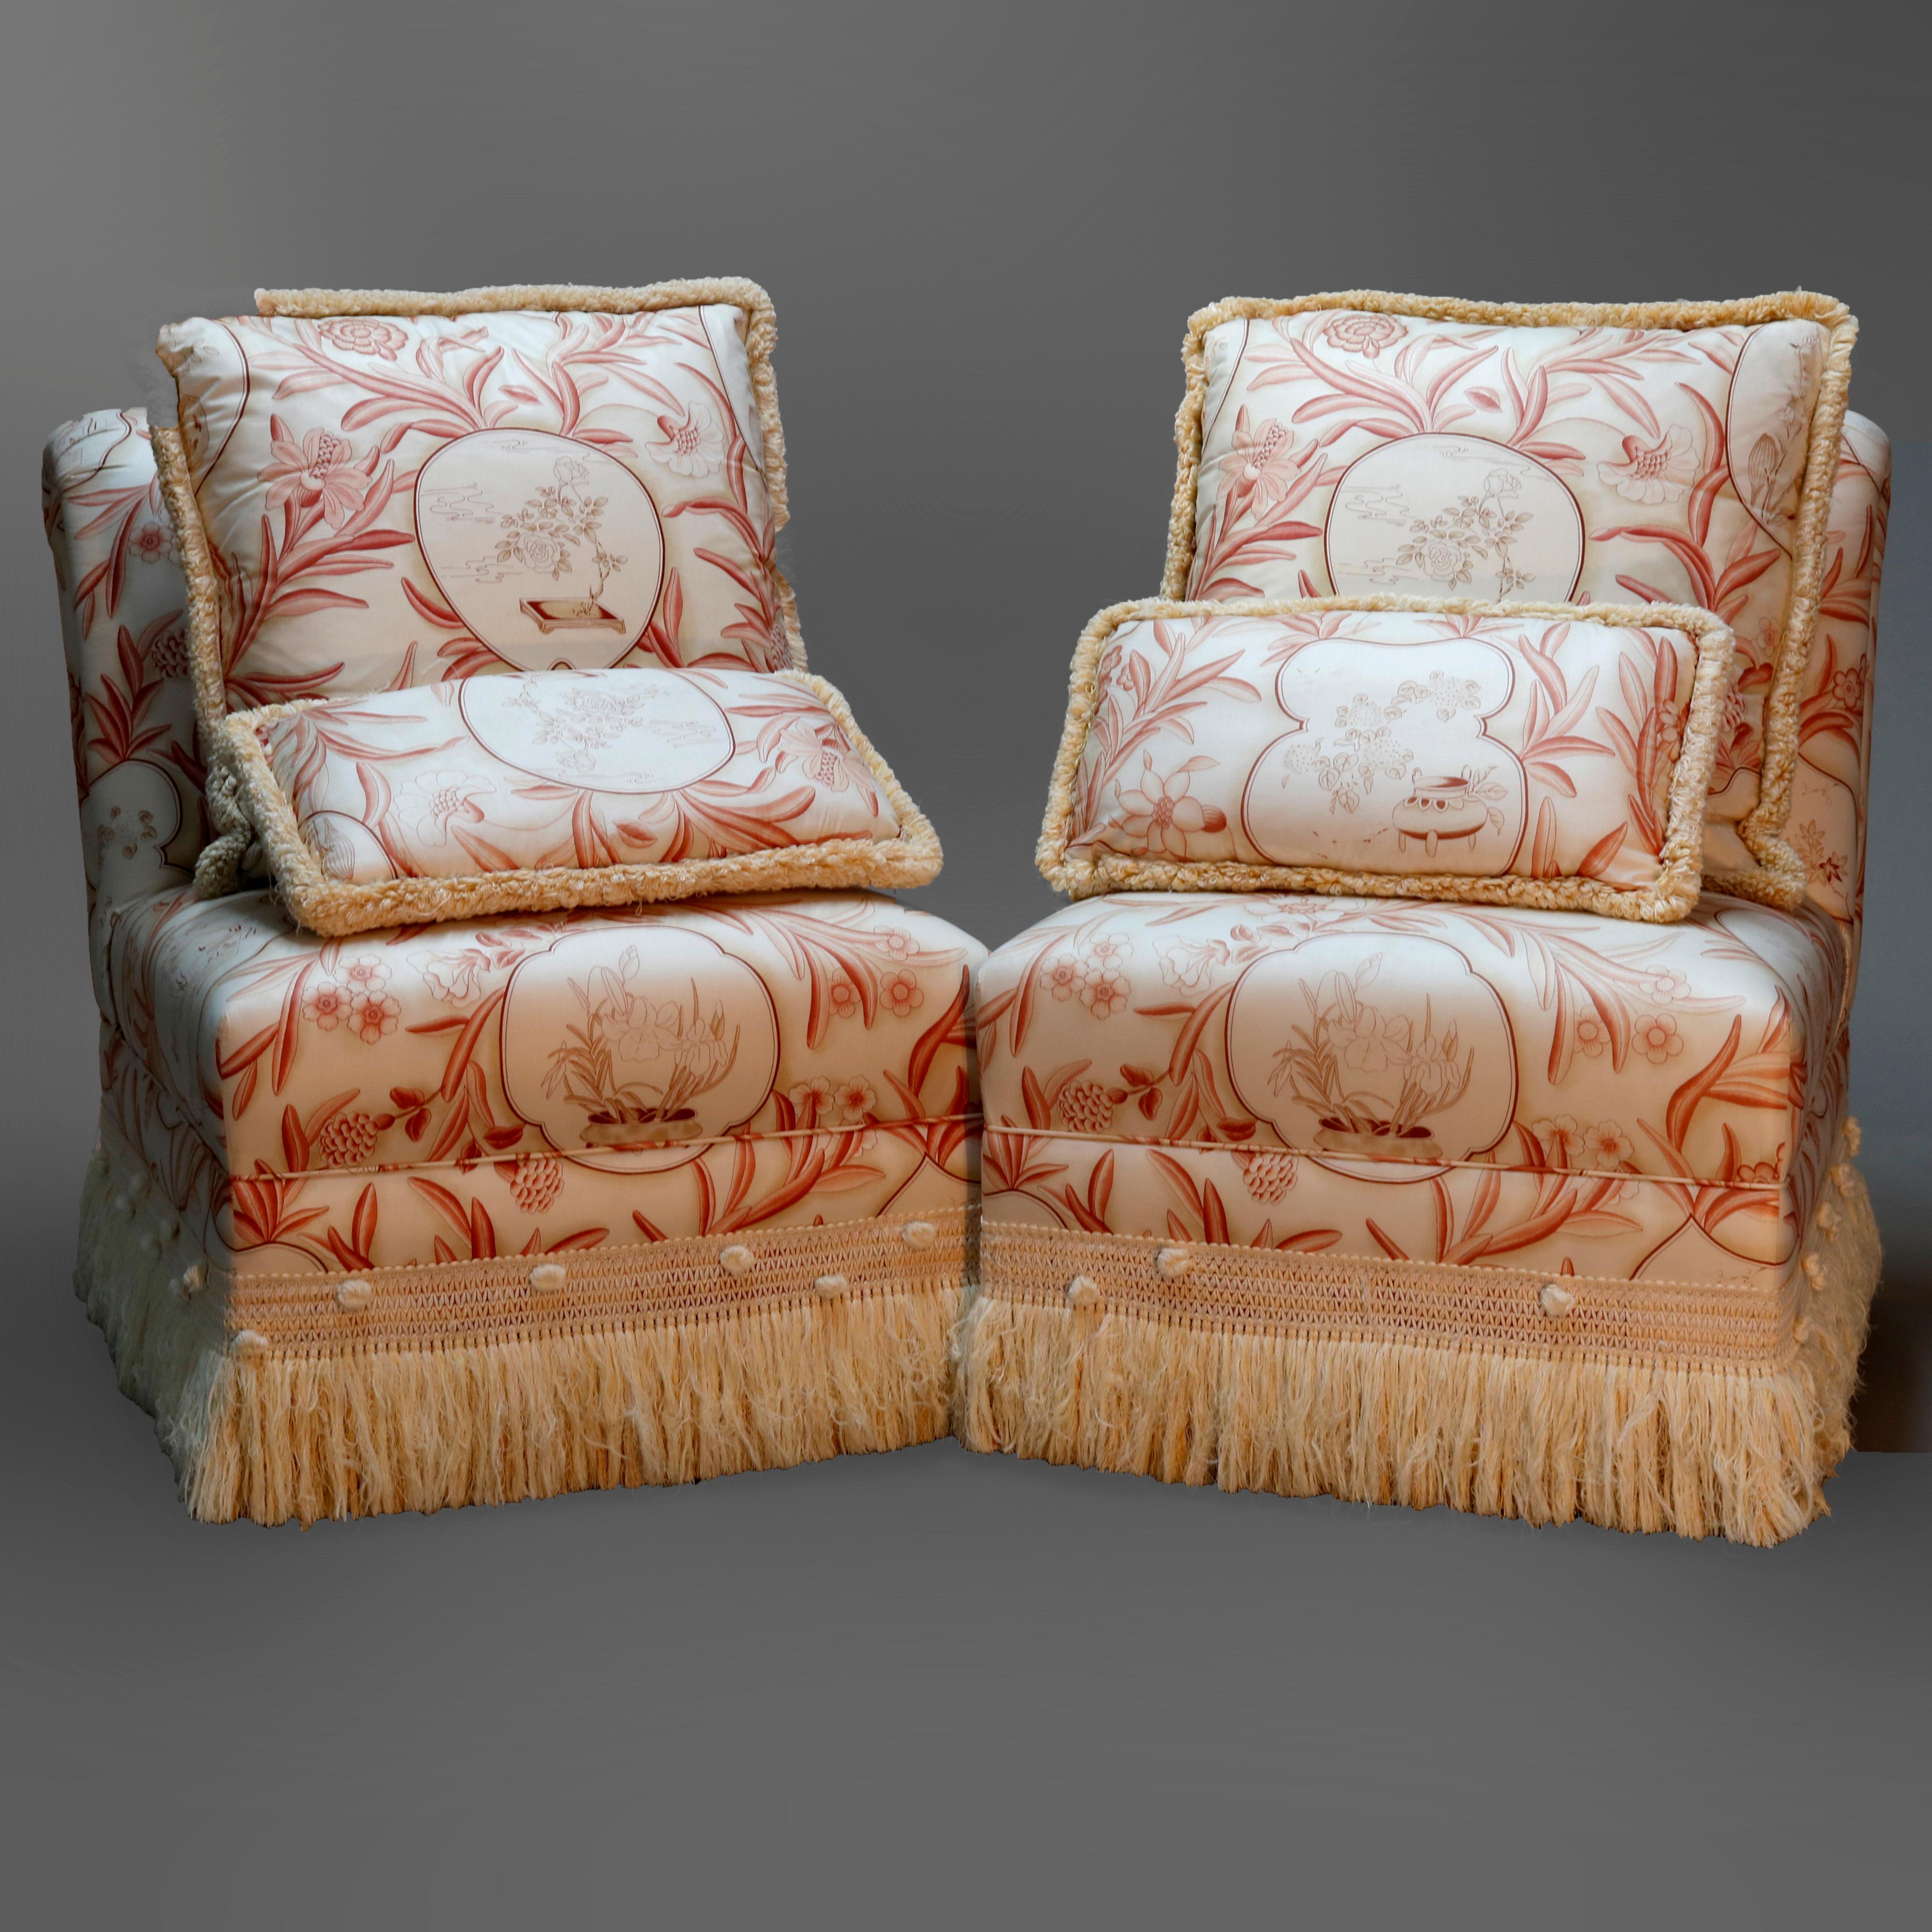 American Vintage Pair of Chinoiserie Upholstered Boudoir Slipper Chairs, 20th Century